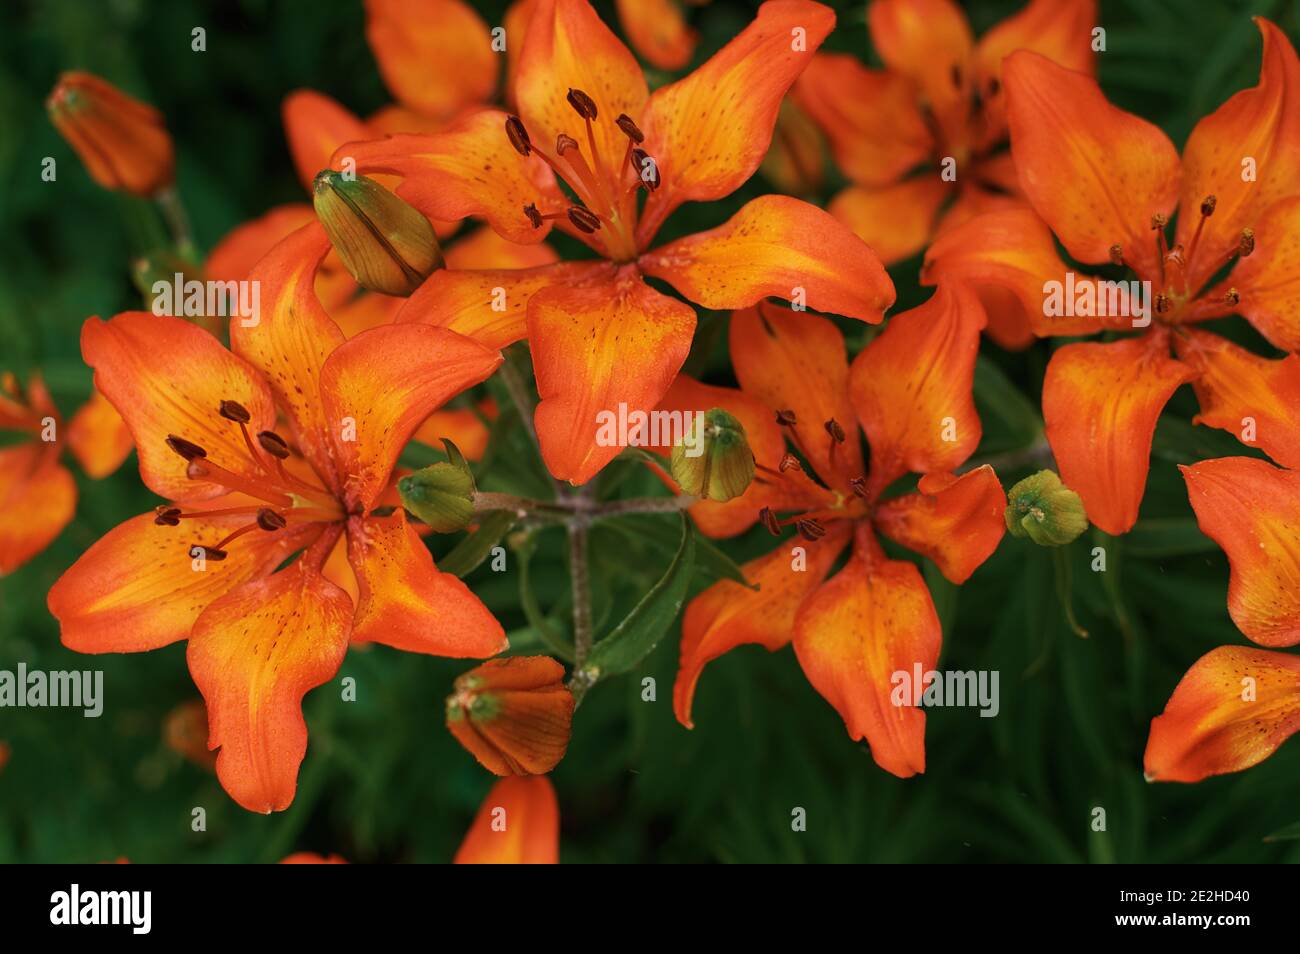 Fiery orange garden lily. Beautiful bright flowers. Lily bush on top. Orange flower in green foliage. Open and closed lily buds. Stock Photo